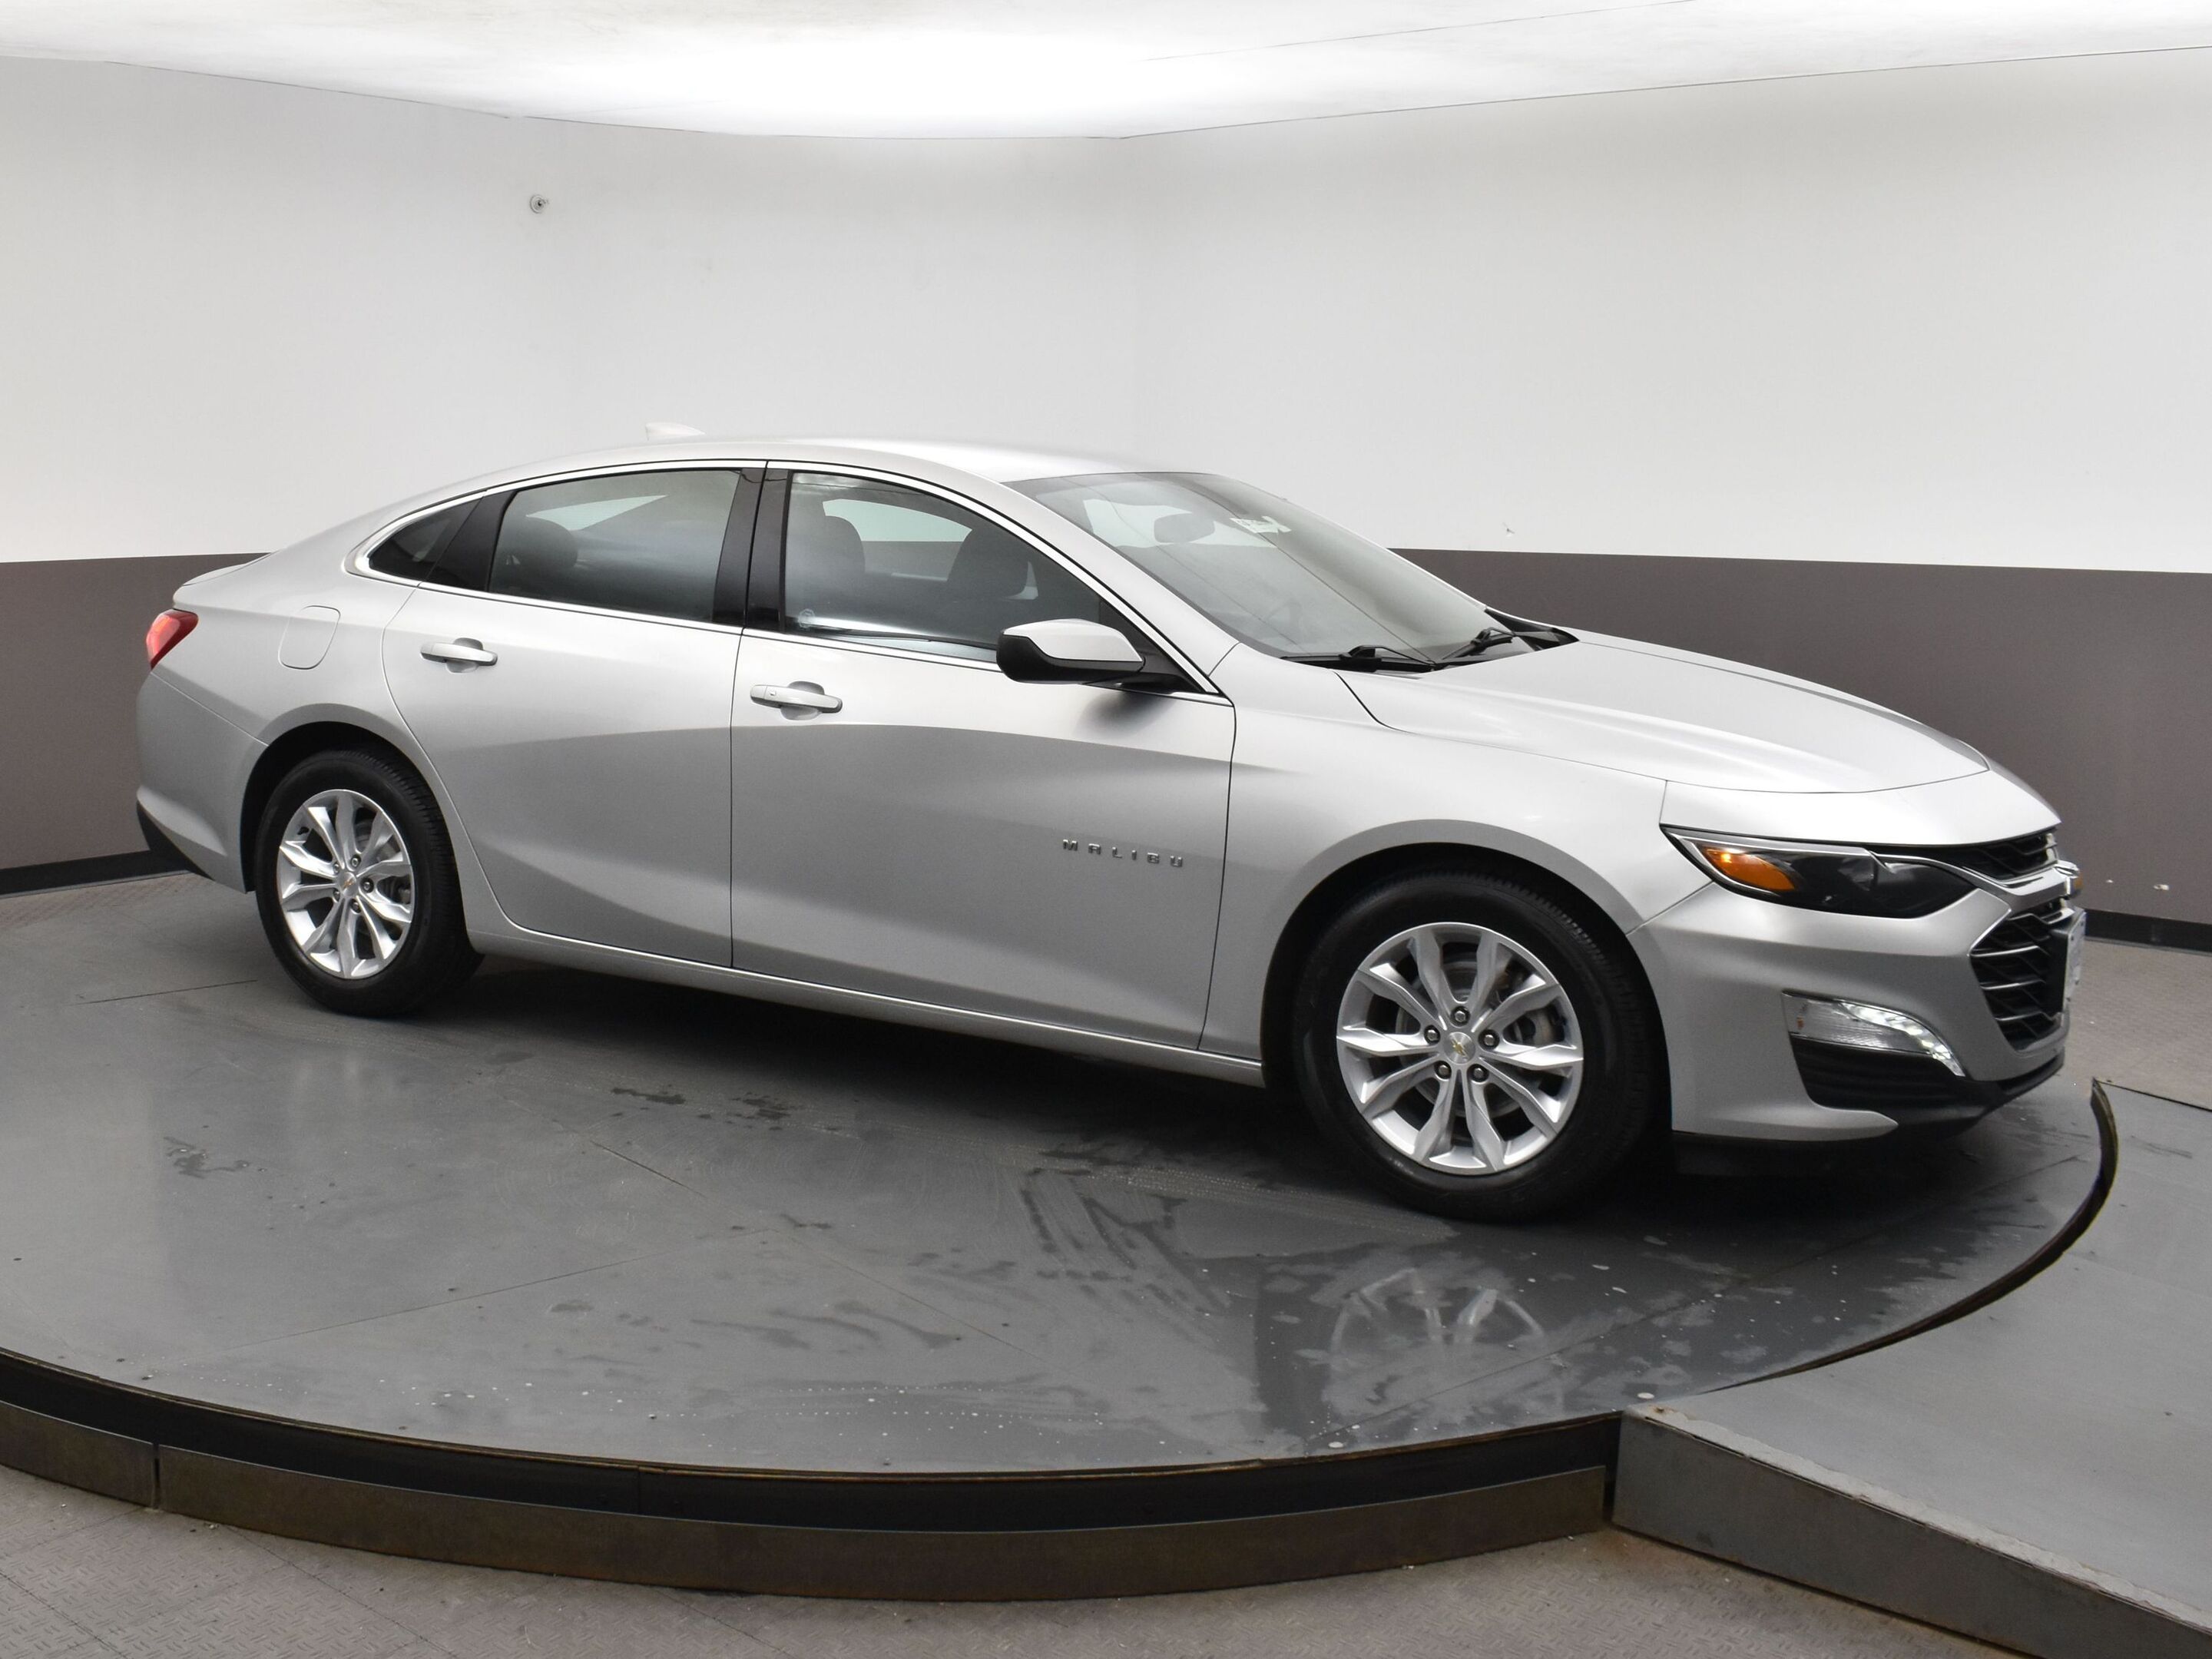 2022 Chevrolet Malibu LT NEW TO CANADA? $0 DOWN APPROVALS AVAILABLE FACT